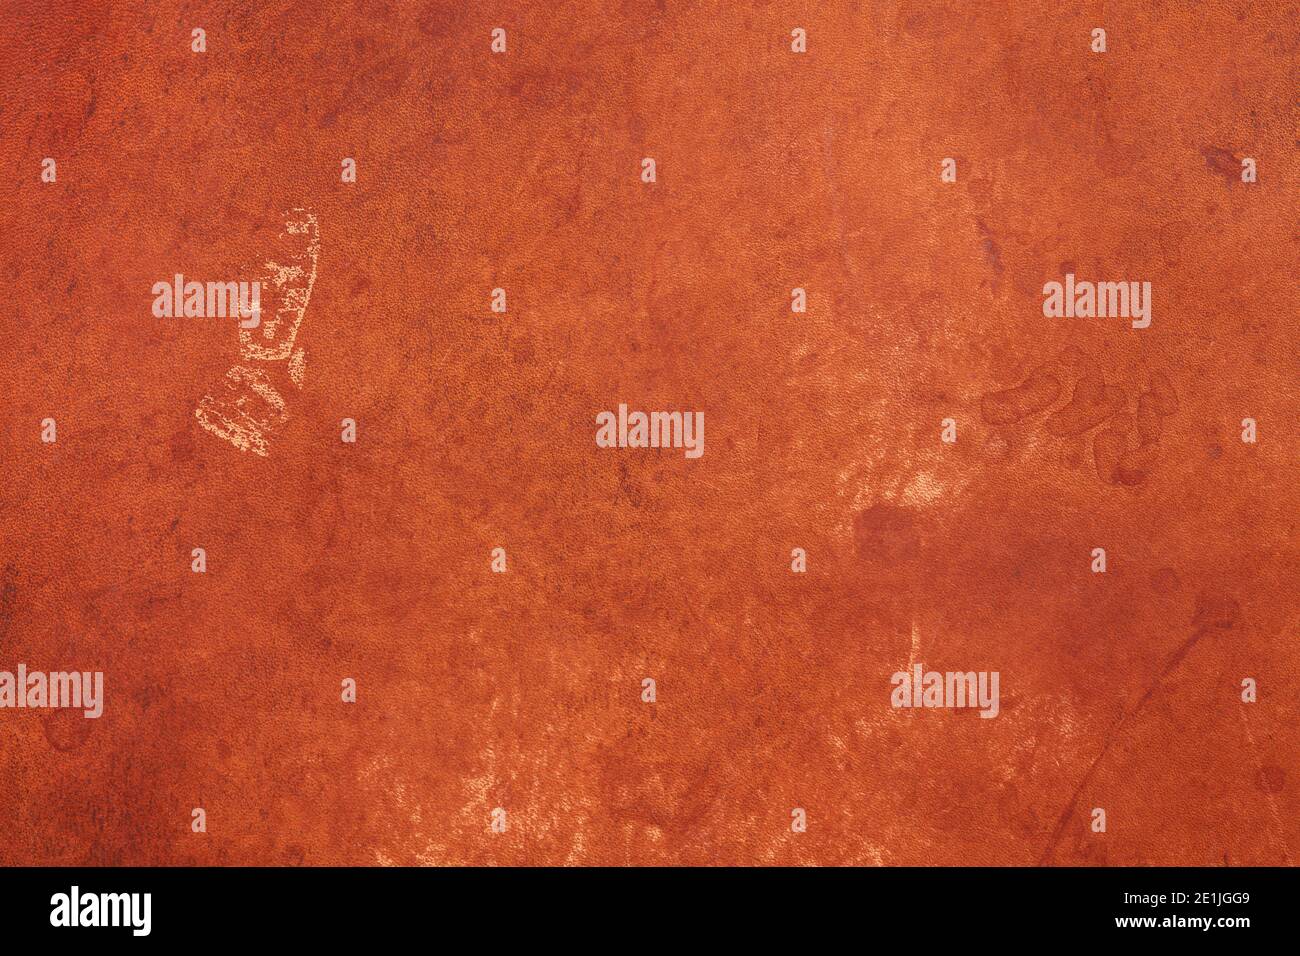 Brown, faded leather texture background Stock Photo